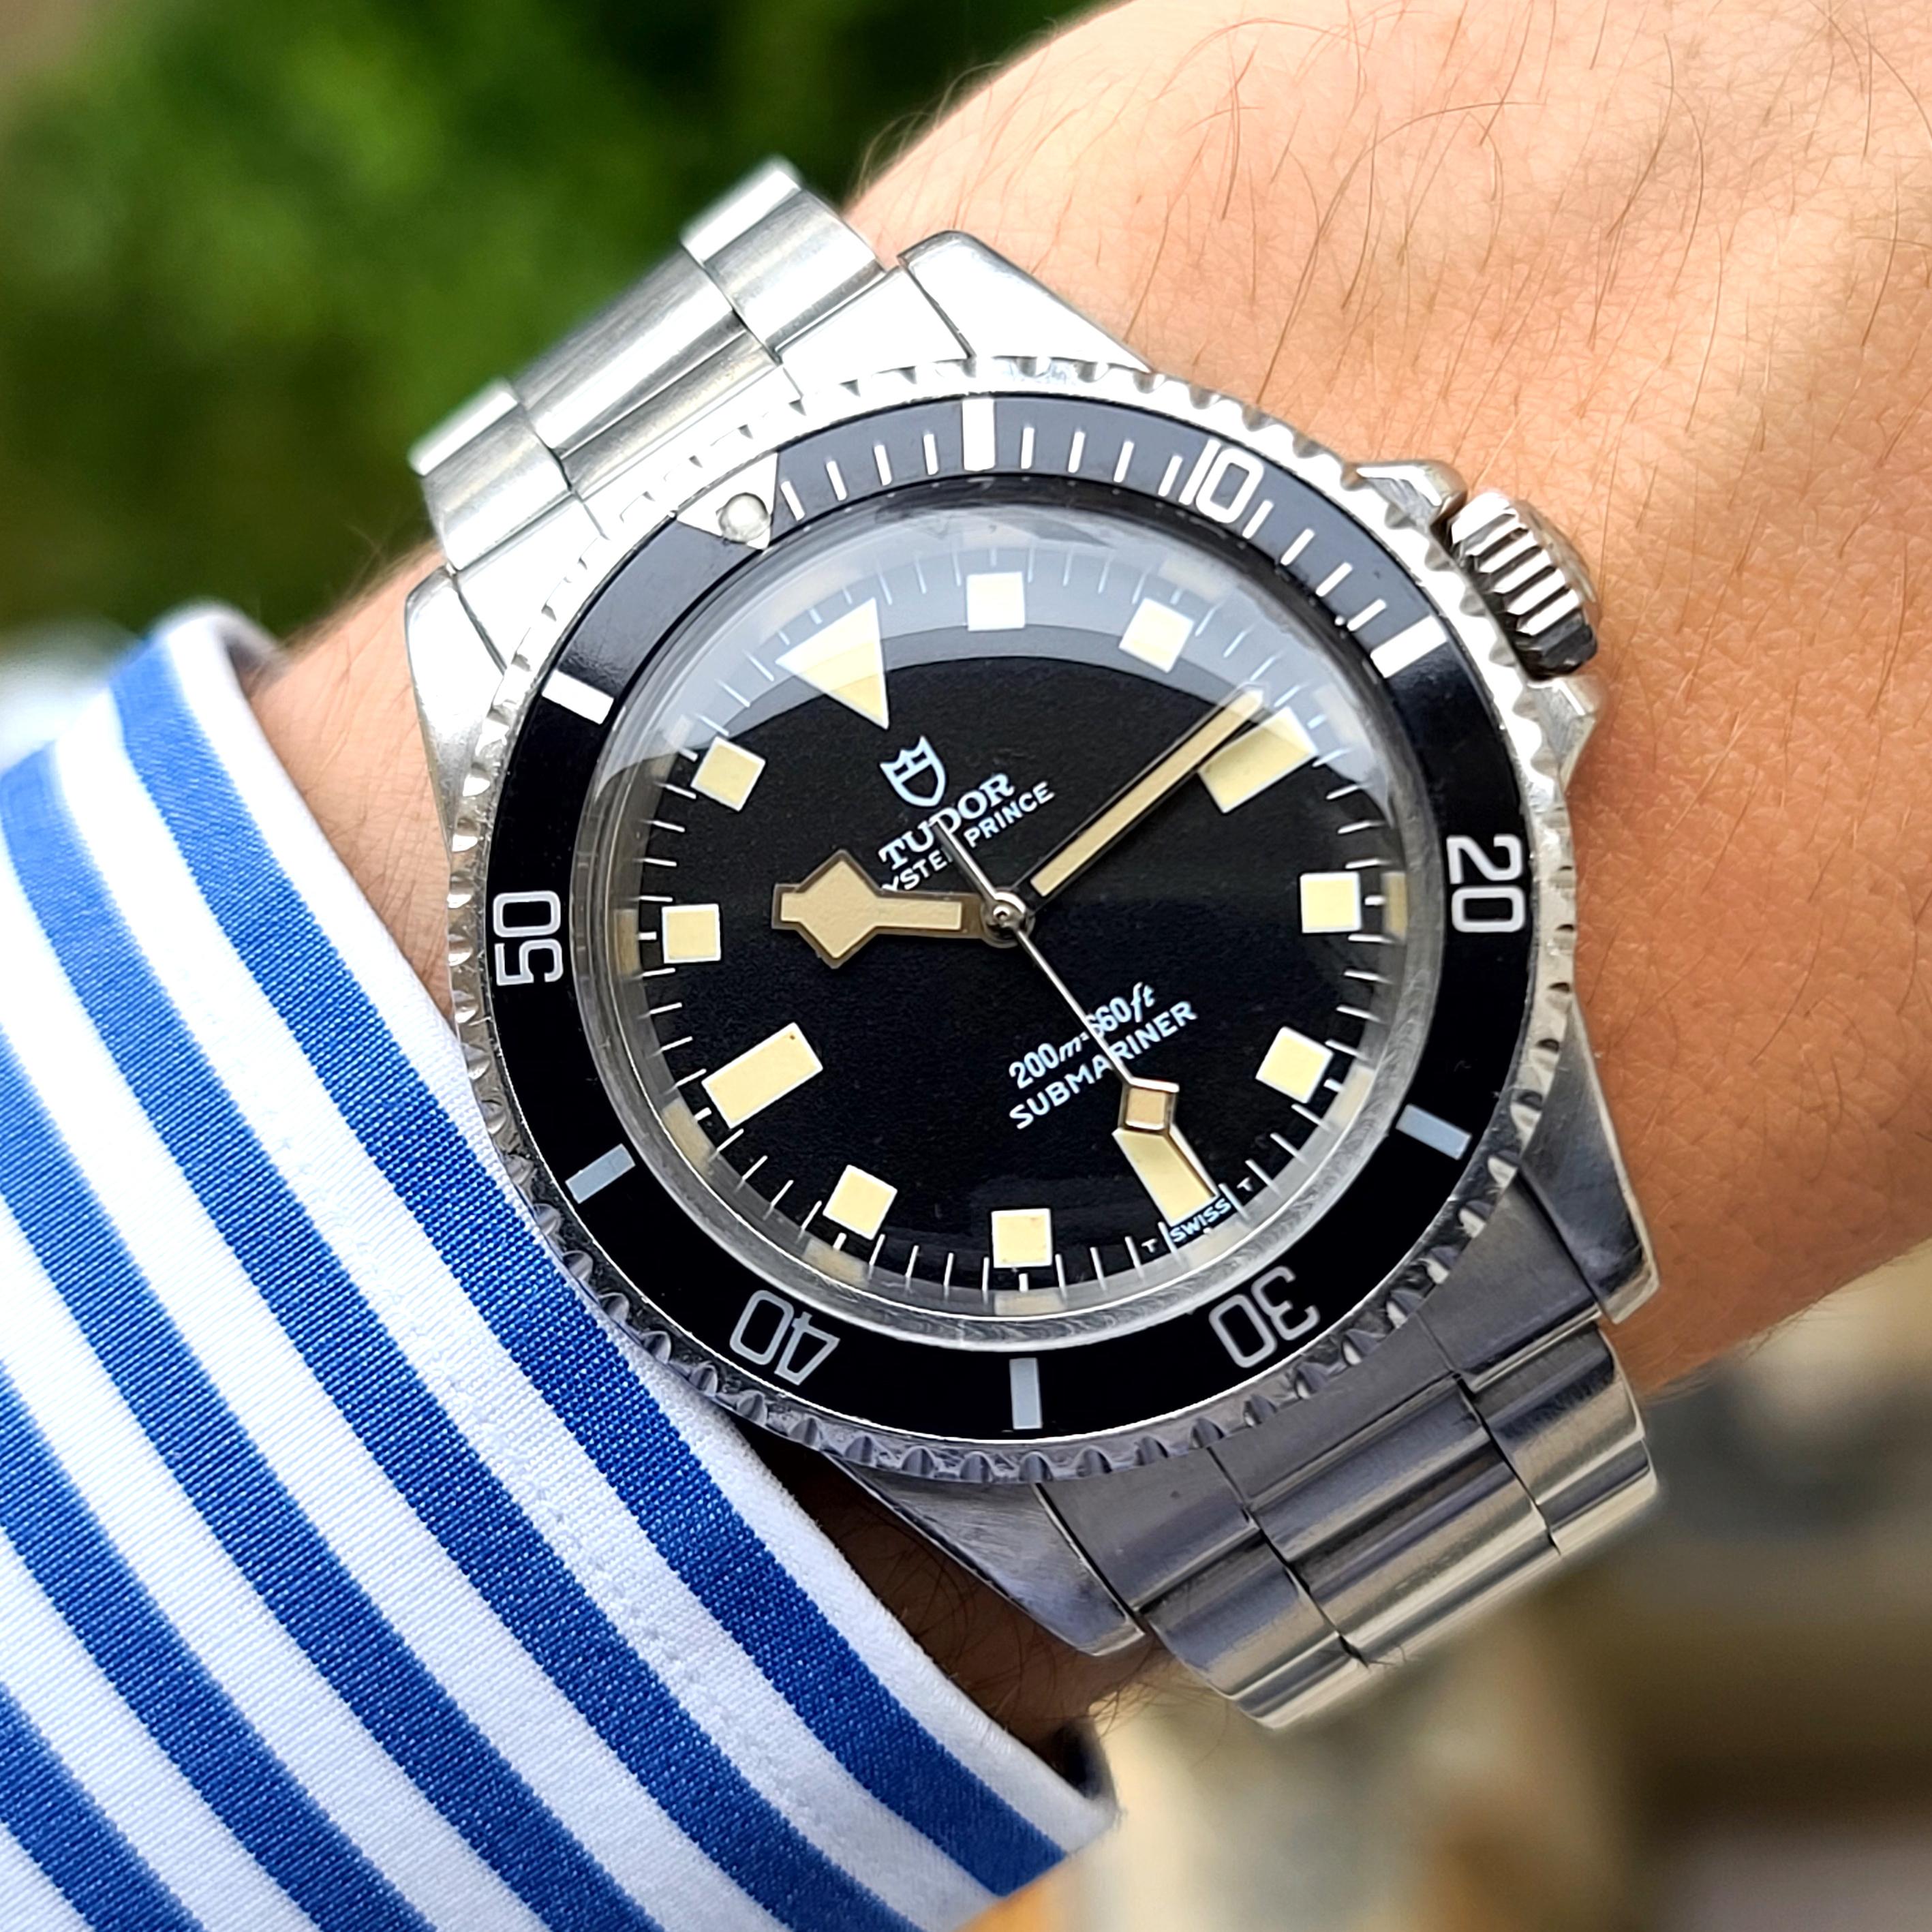 TUDOR
Founded in 1926

For the discerning few

The Tudor Submariner is perhaps one of the widely issued military dive watches, having been worn by troops in the French, United States, South African, Argentinian and Italian navies, as well as other